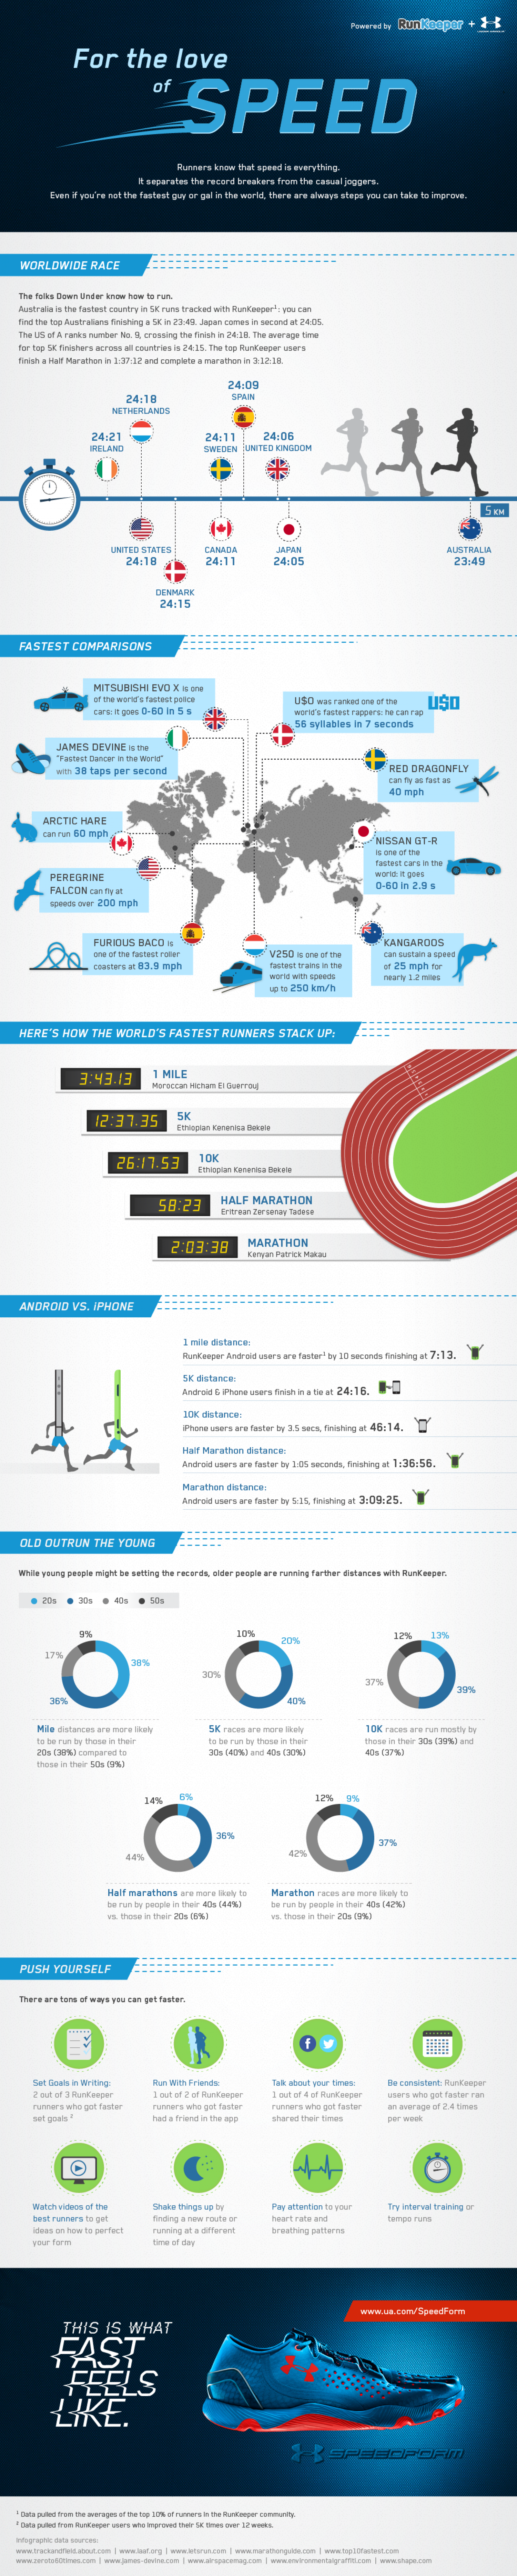 For the Love of Speed Infographic